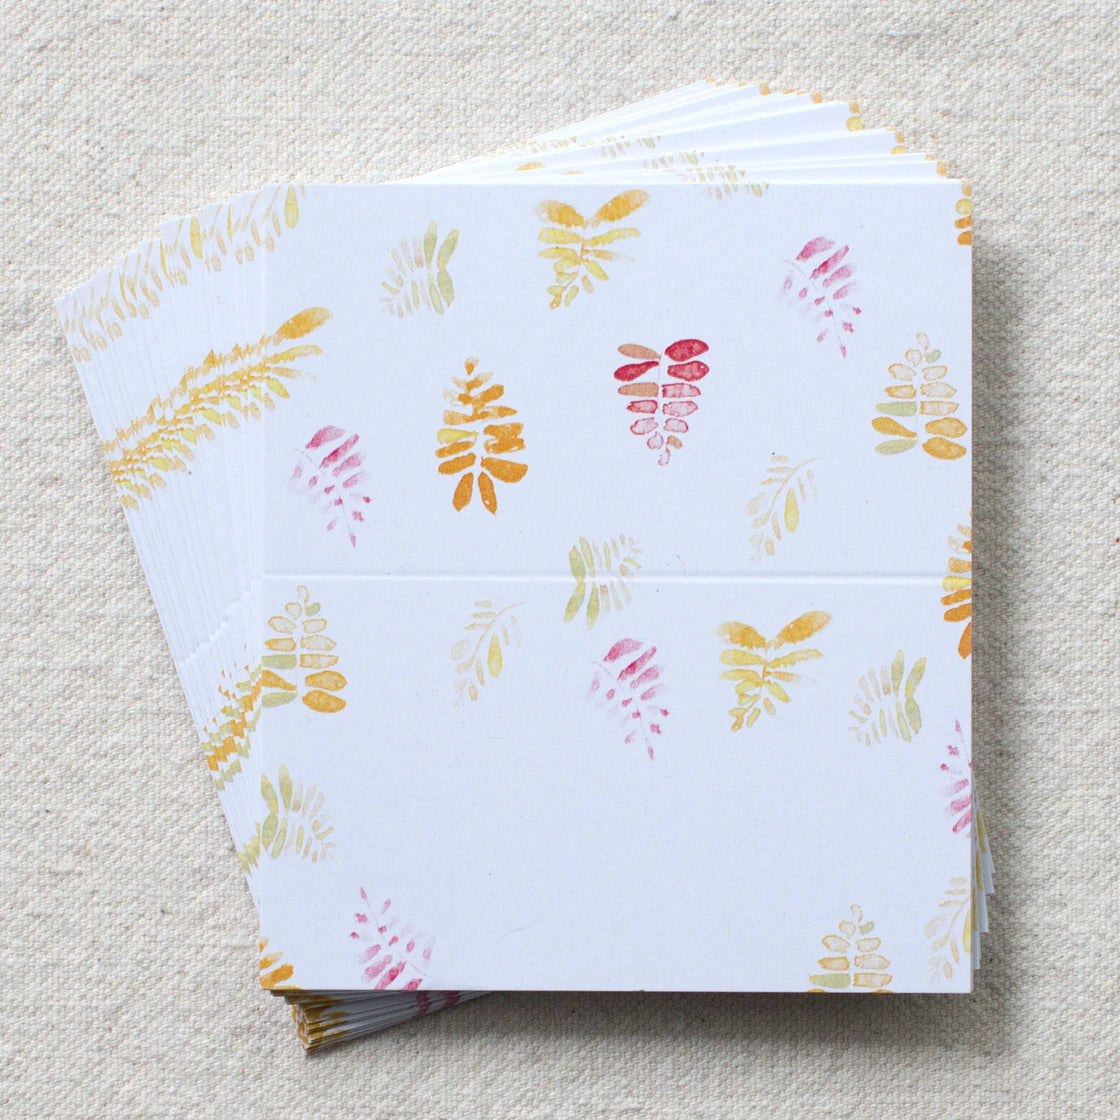 Fern Print Place Cards